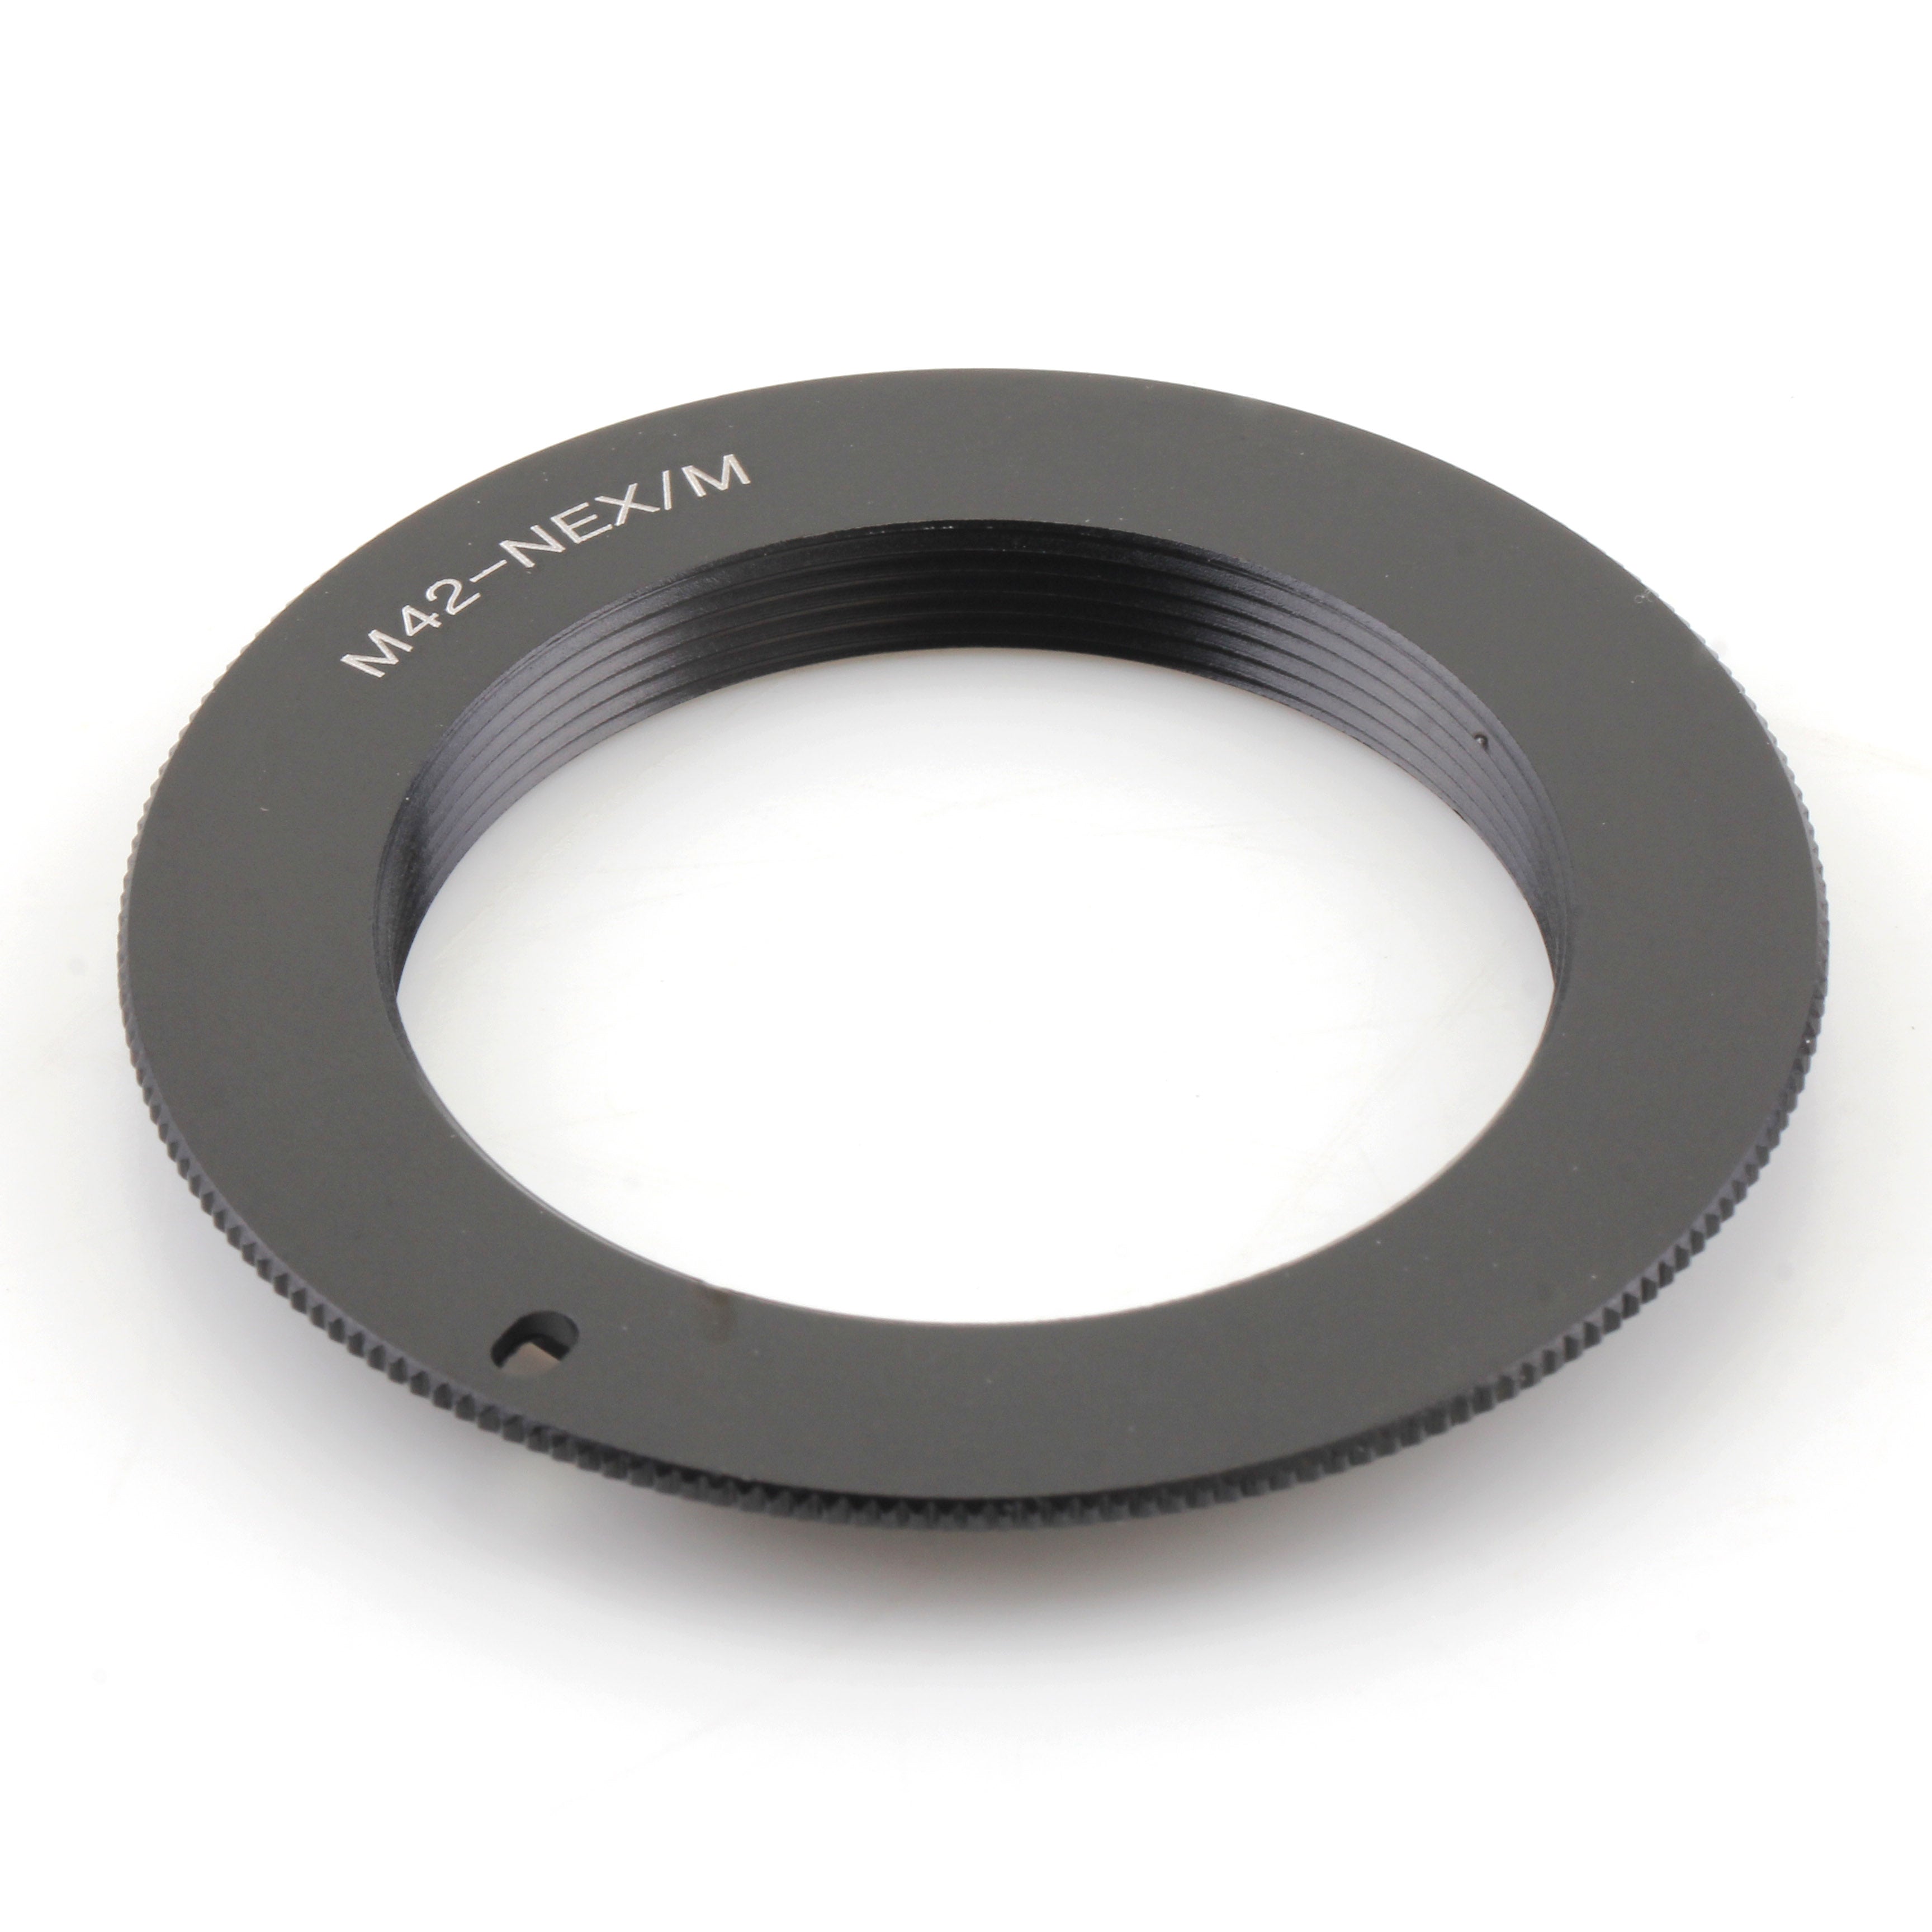 Super slim M42 screw mount lens to Sony E mount NEX adapter - for macro helicoid extension ring - NEX-7 A9 II A7 IV A6500